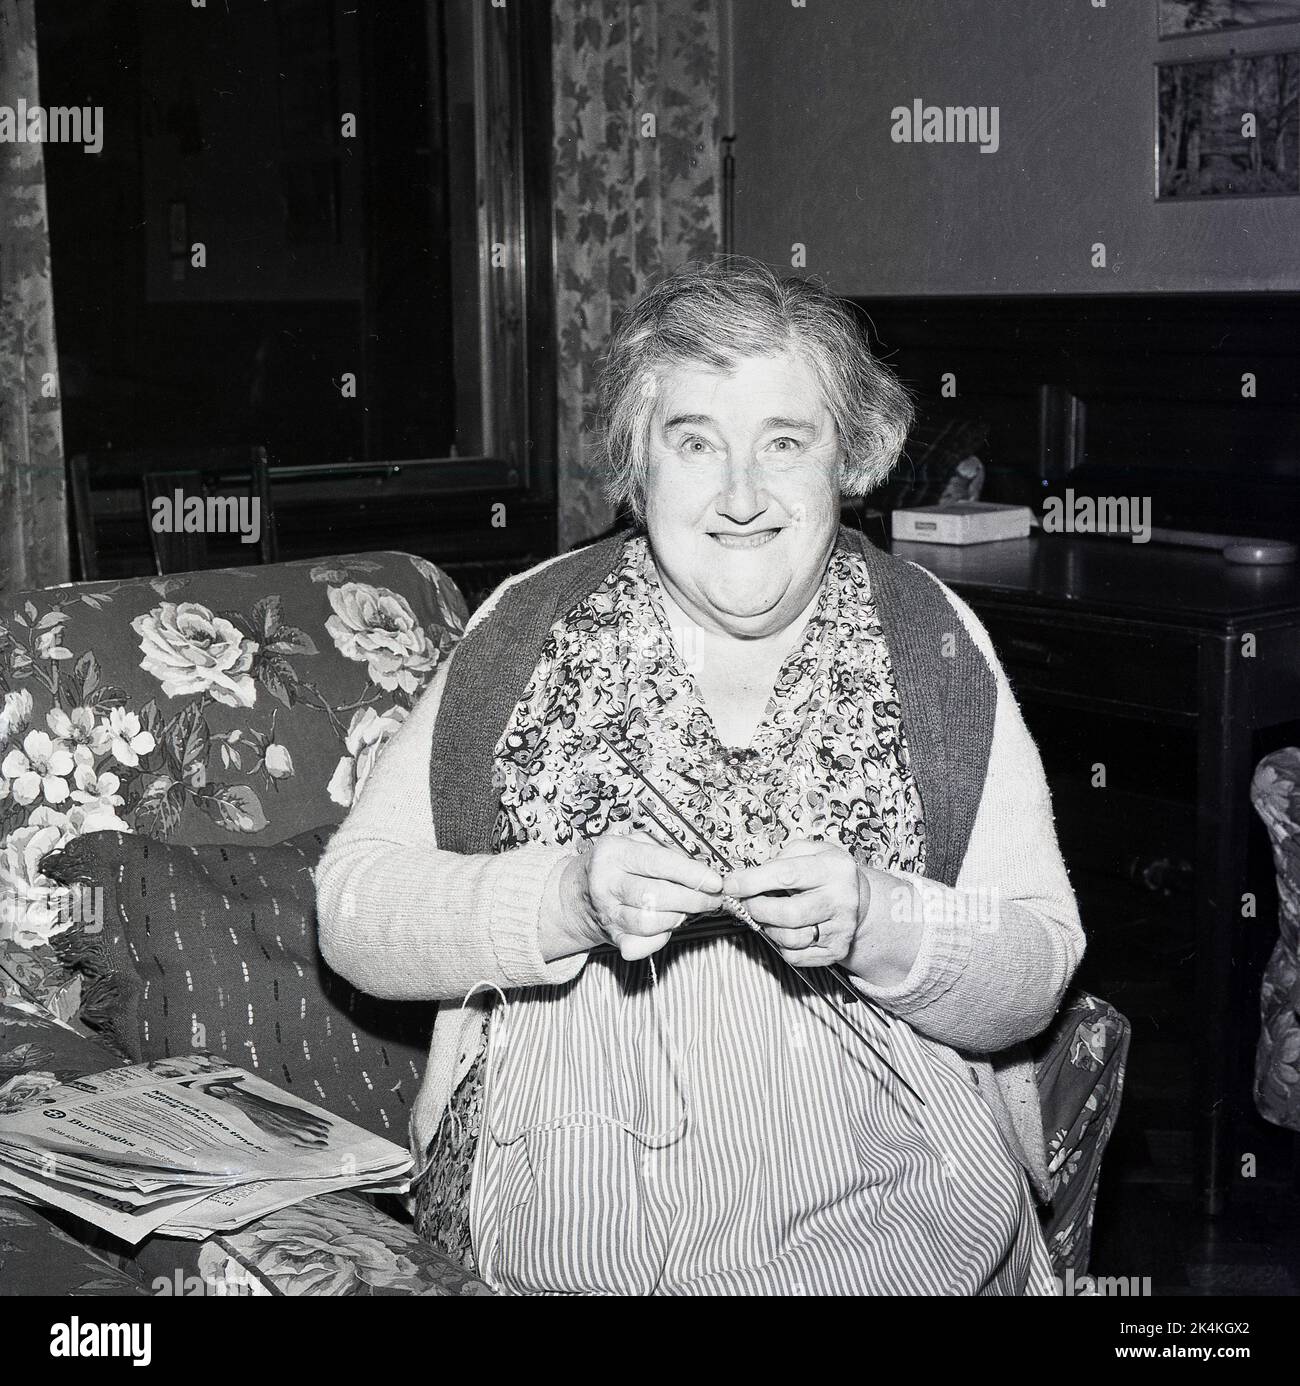 1965, historical, an elderly lady sitting, holidng her knitting needles, in an old peoples home smiling for a photo, Scotland, UK. Stock Photo